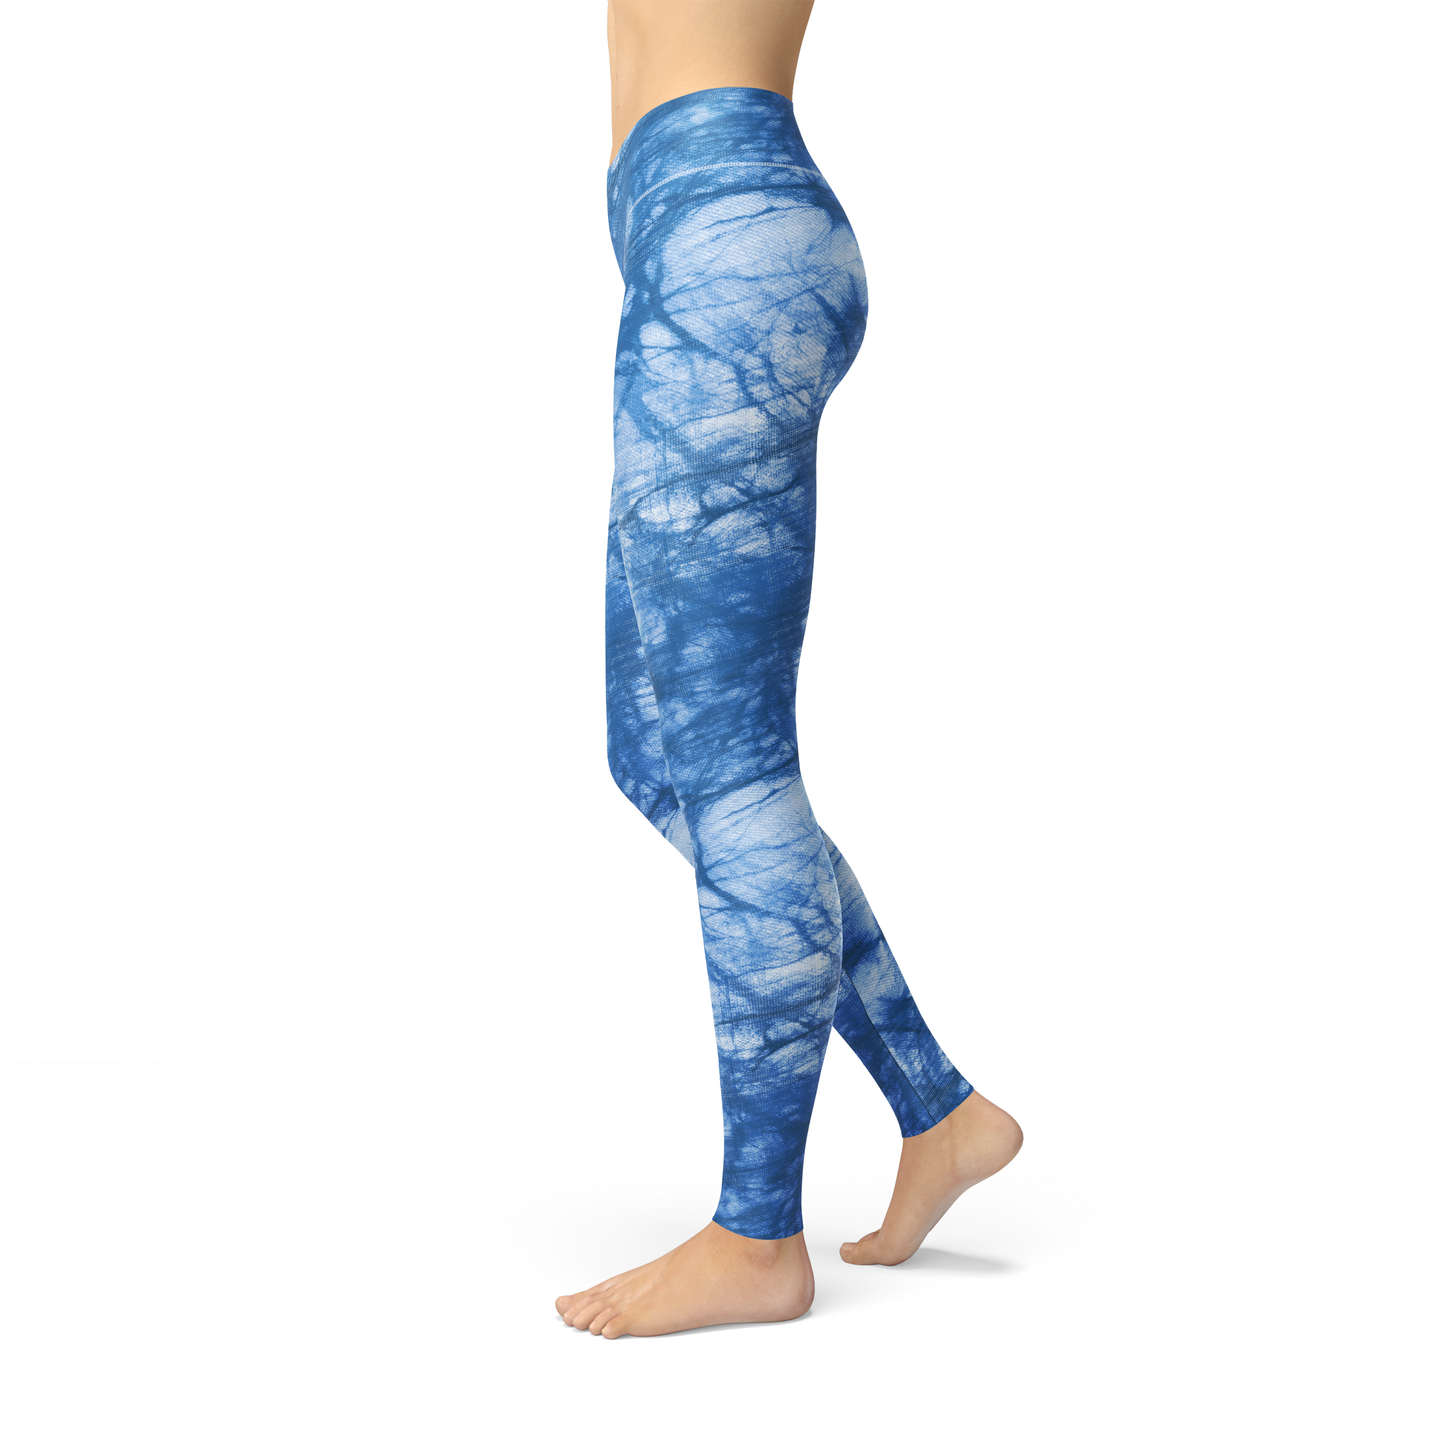 Shop our Aqua Leggings for a perfect blend of style and comfort. Ideal for your active lifestyle.